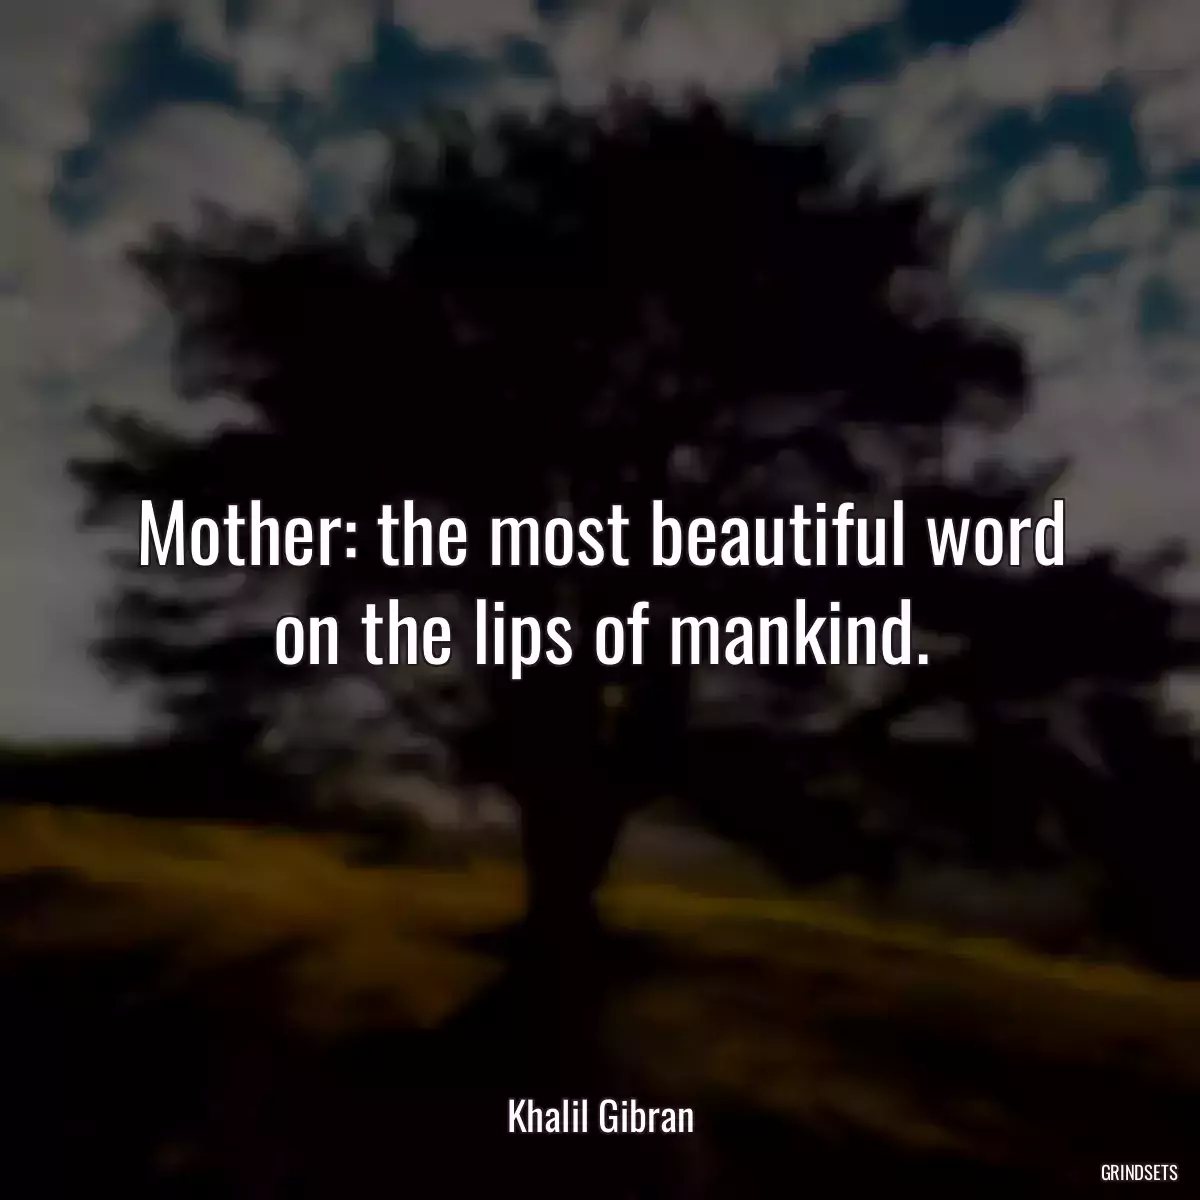 Mother: the most beautiful word on the lips of mankind.